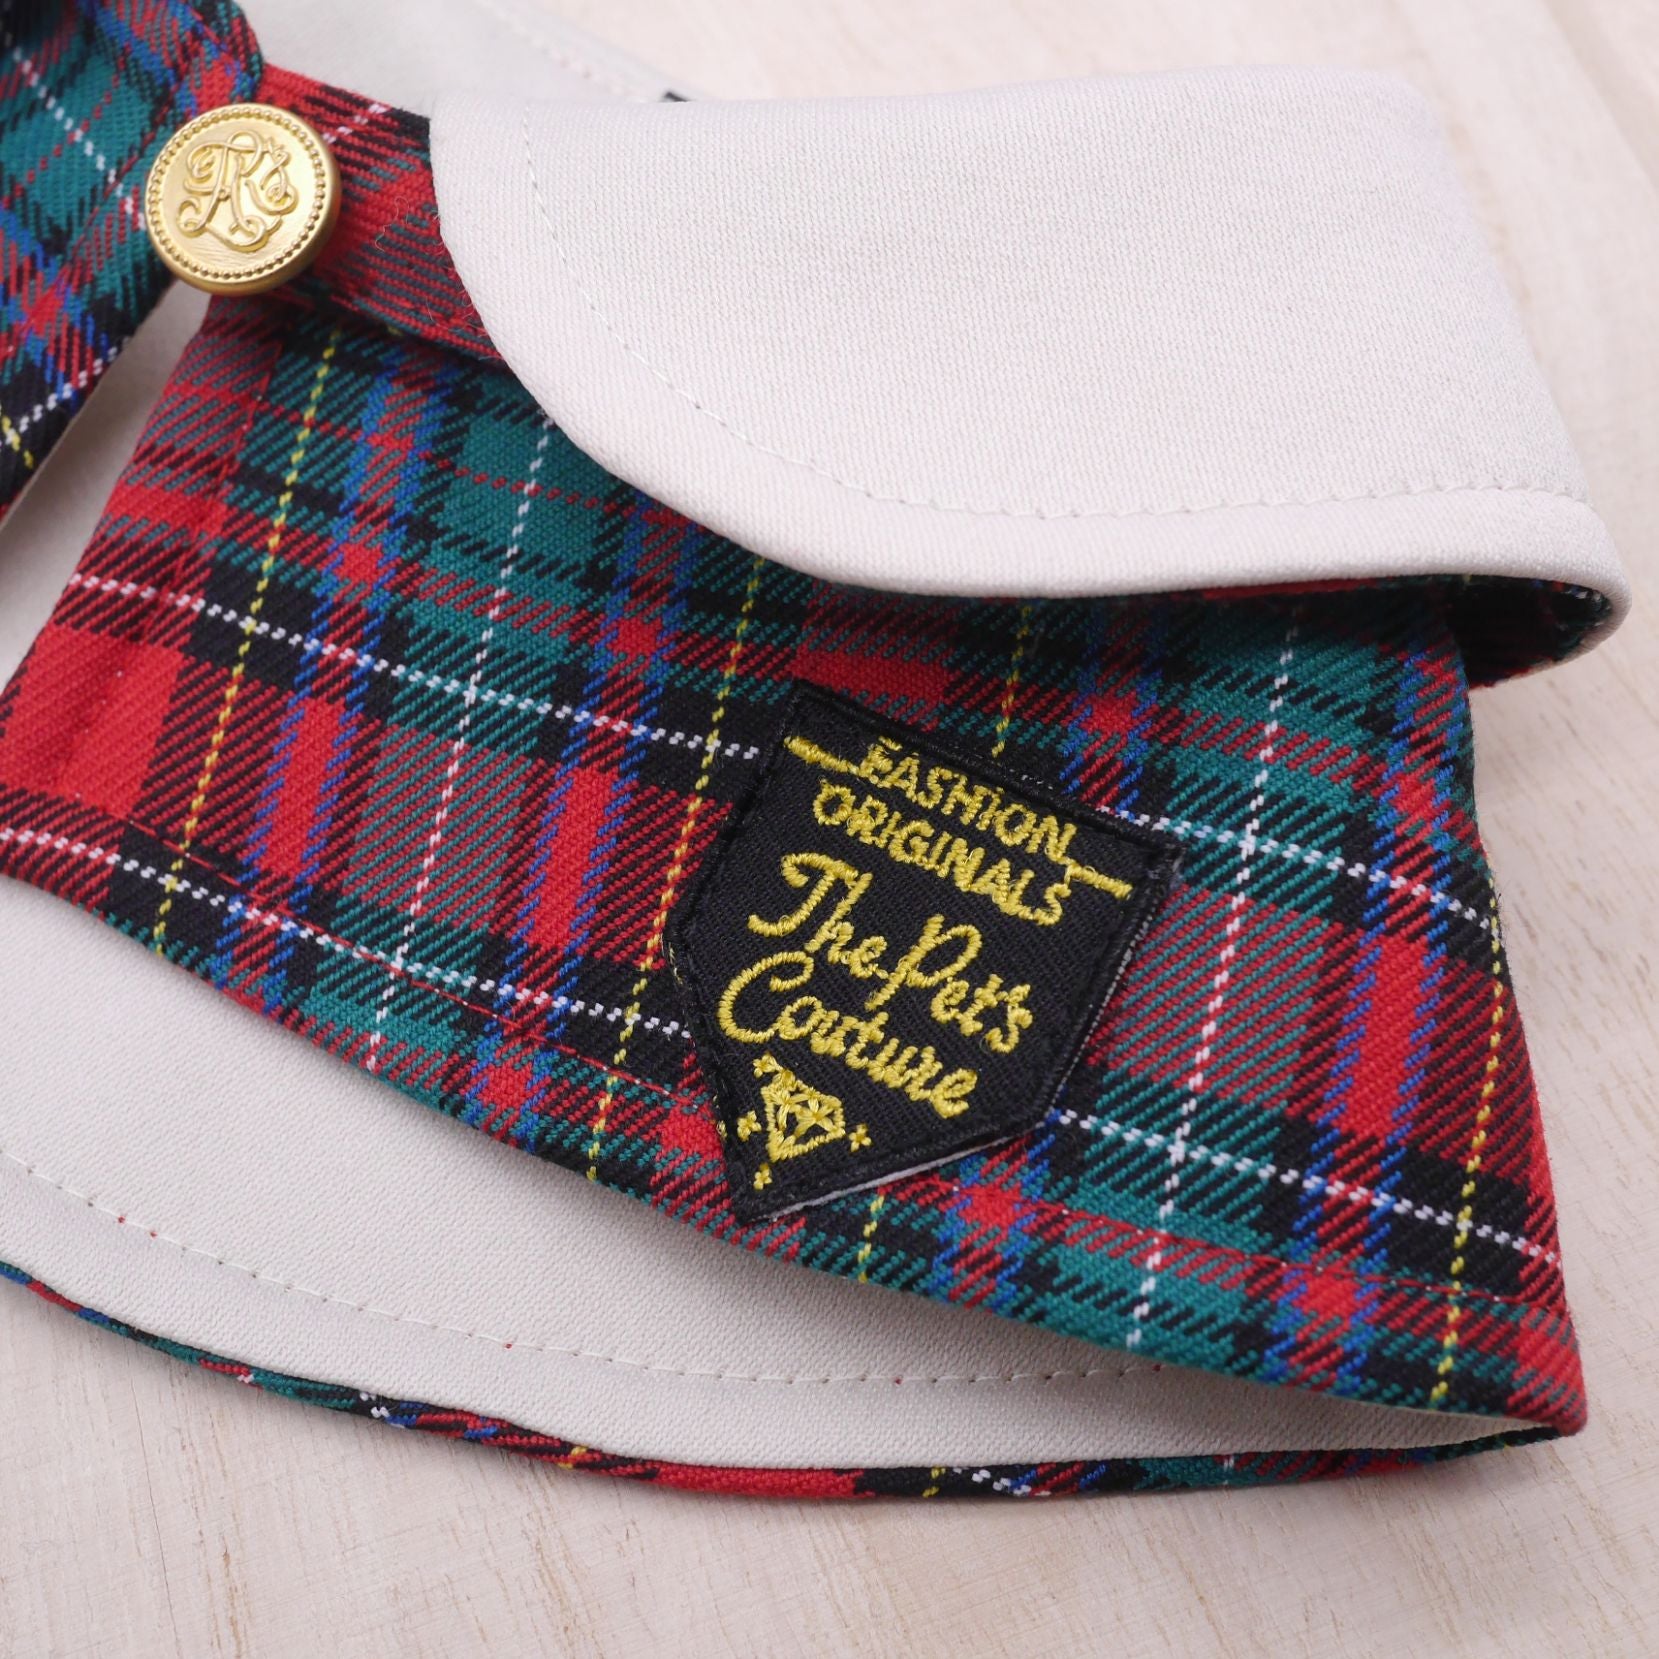 Capes - White Collar with Royal Tartan Print - The Pet's Couture